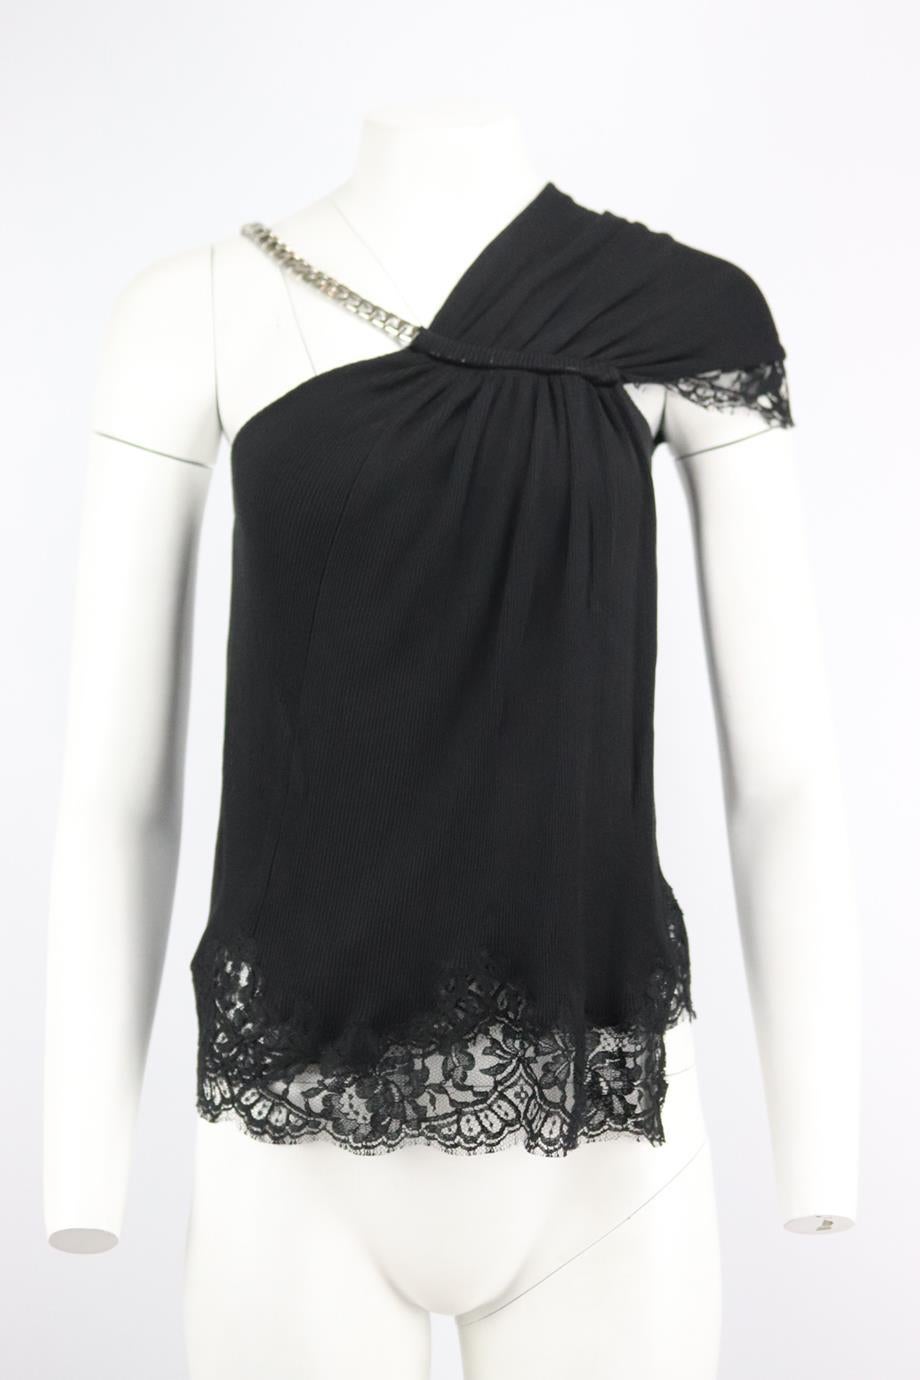 Givenchy lace trimmed ribbed knit top. Black. Sleeveless, v-neck. Slips on. Size: Small (UK 8, US 4, FR 36, IT 40). Bust: 26 in. Waist: 25 in. Hips: 32 in. Length: 21 in. Very good condition - Label cut out for comfort; see pictures.
